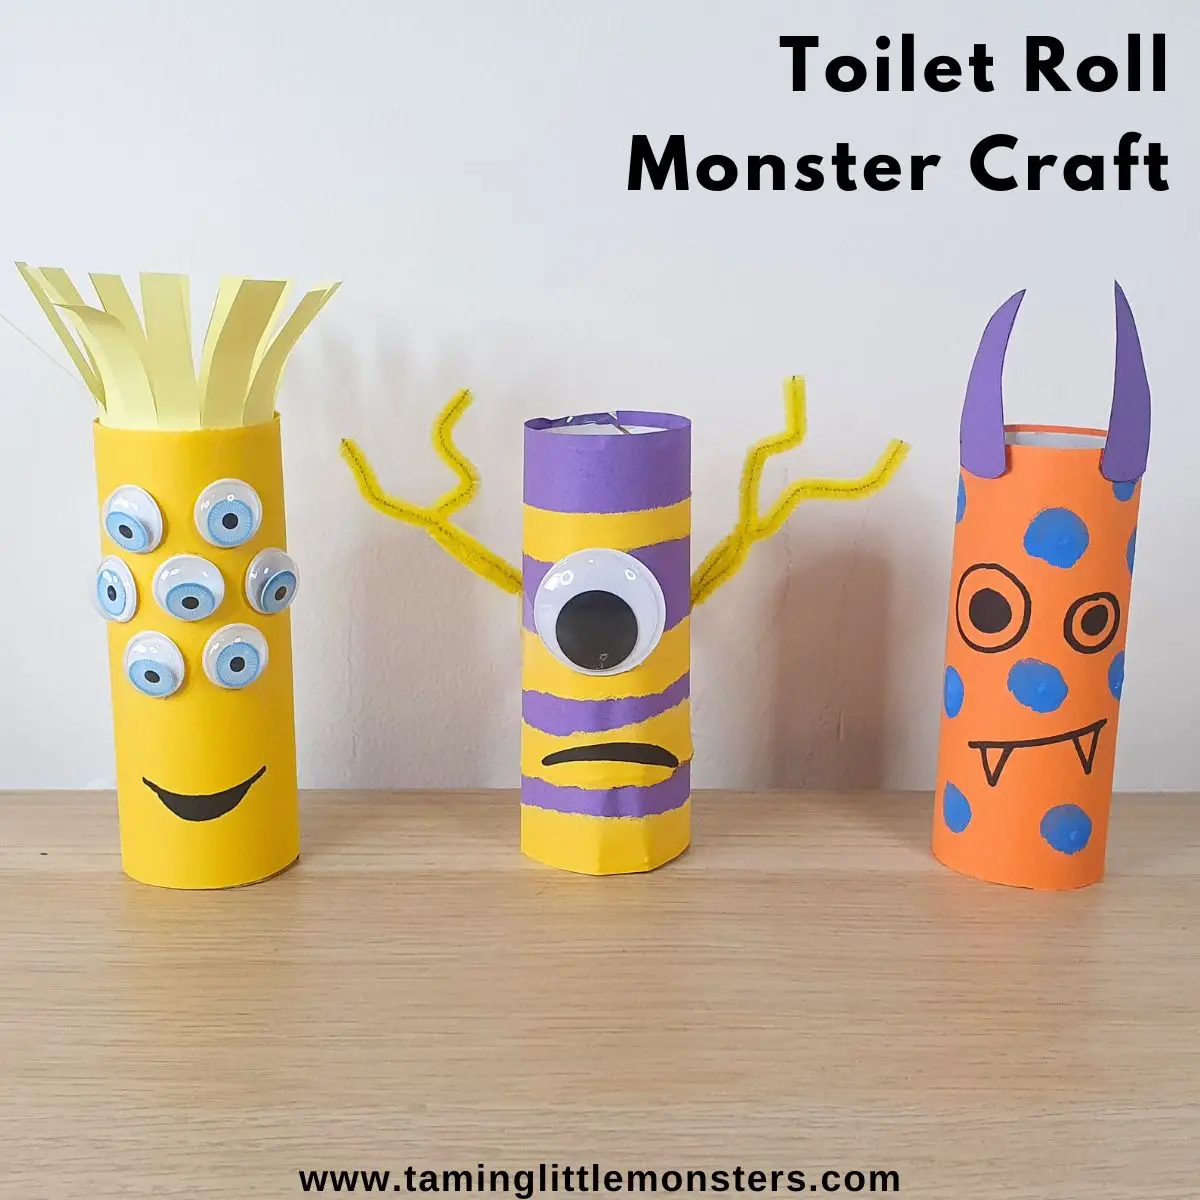 20 Fun Toilet Paper Roll Crafts Kids Will Love to Make